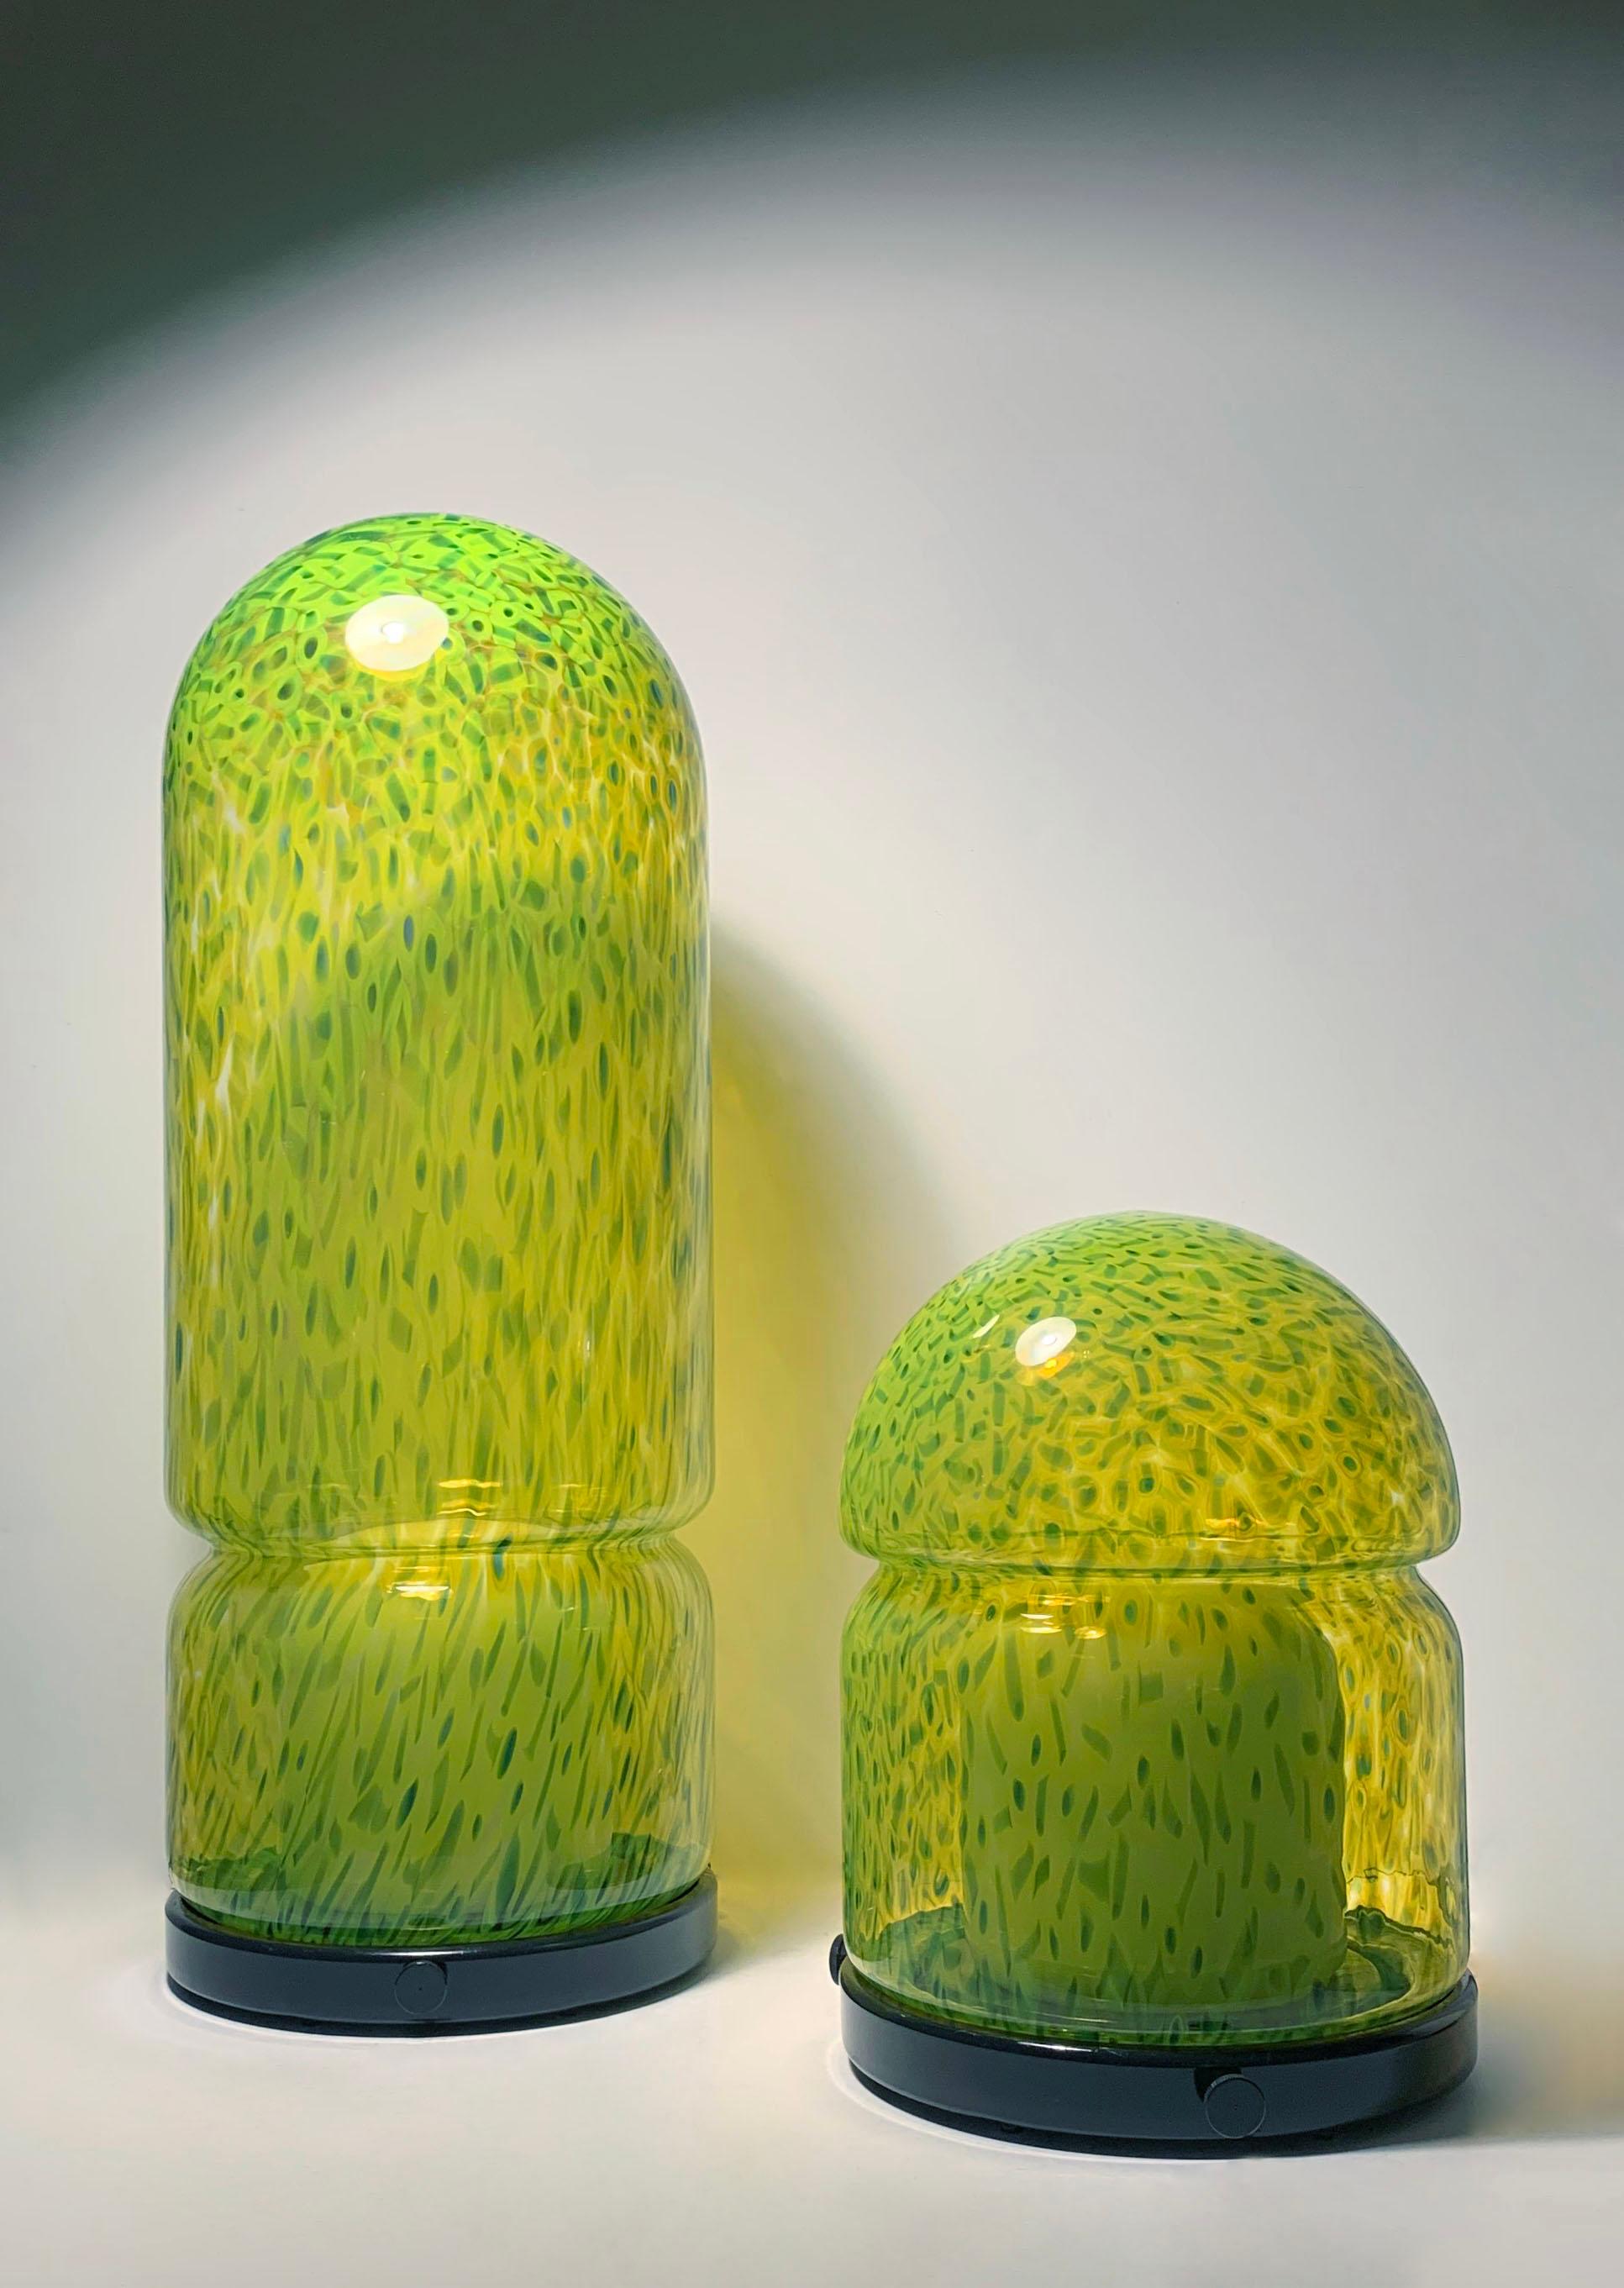 Pair of Large Vintage Vistosi Architectural Glass lamps by Gae Aulenti

One has a switch on the cord, the other does not. Just plugs in. A switch can be added easily on the cord if desired. 

Short: 15.5